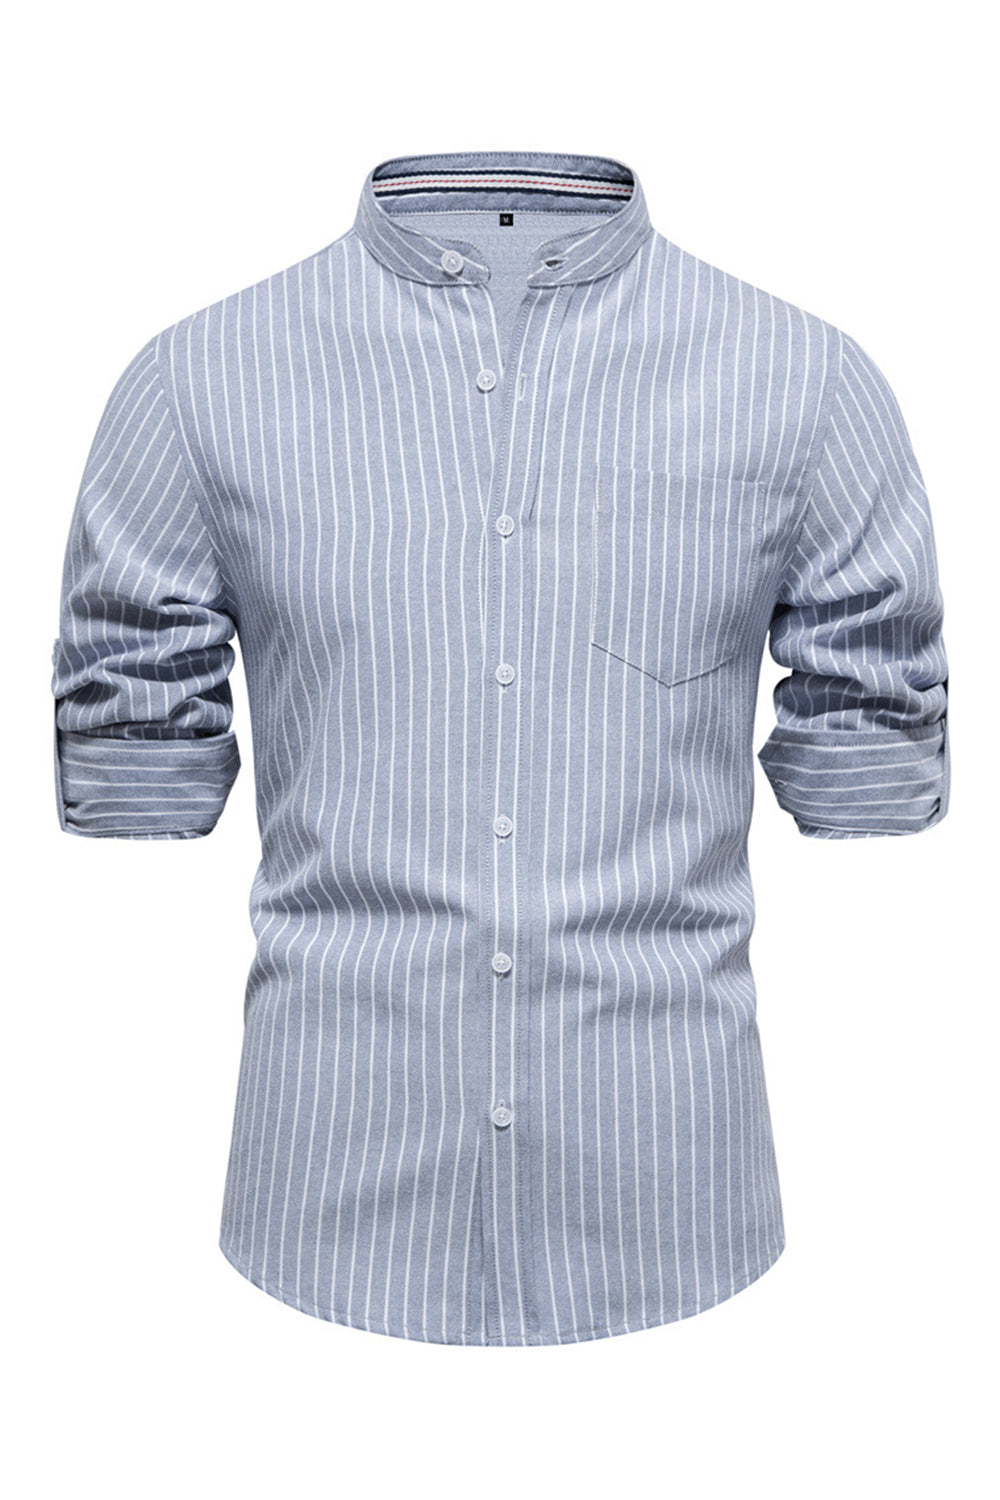 Gray Blue Stripes Stand Collar Casual Polo Shirt